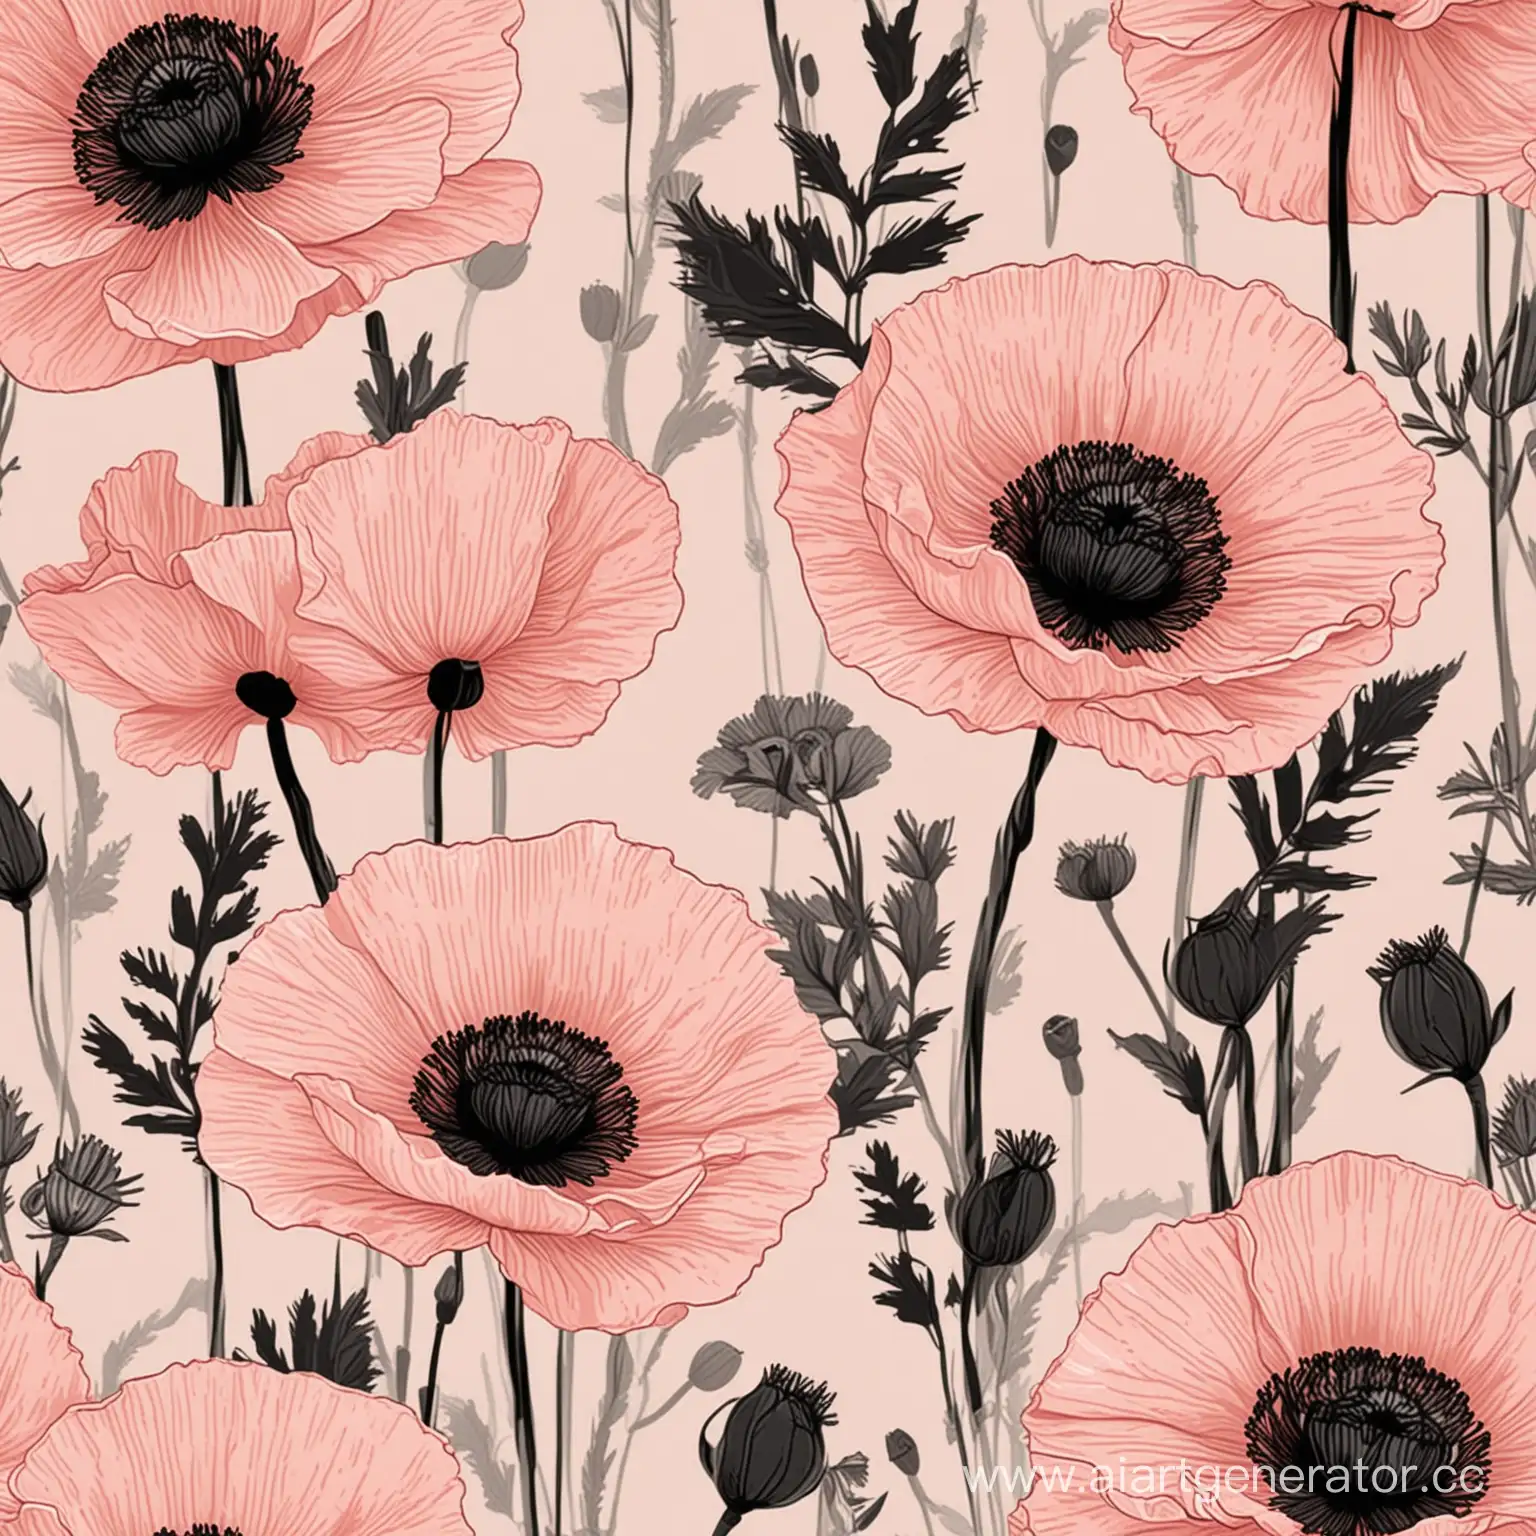 Floral-Seamless-Pattern-HandDrawn-Poppies-on-Light-PinkBlack-Background